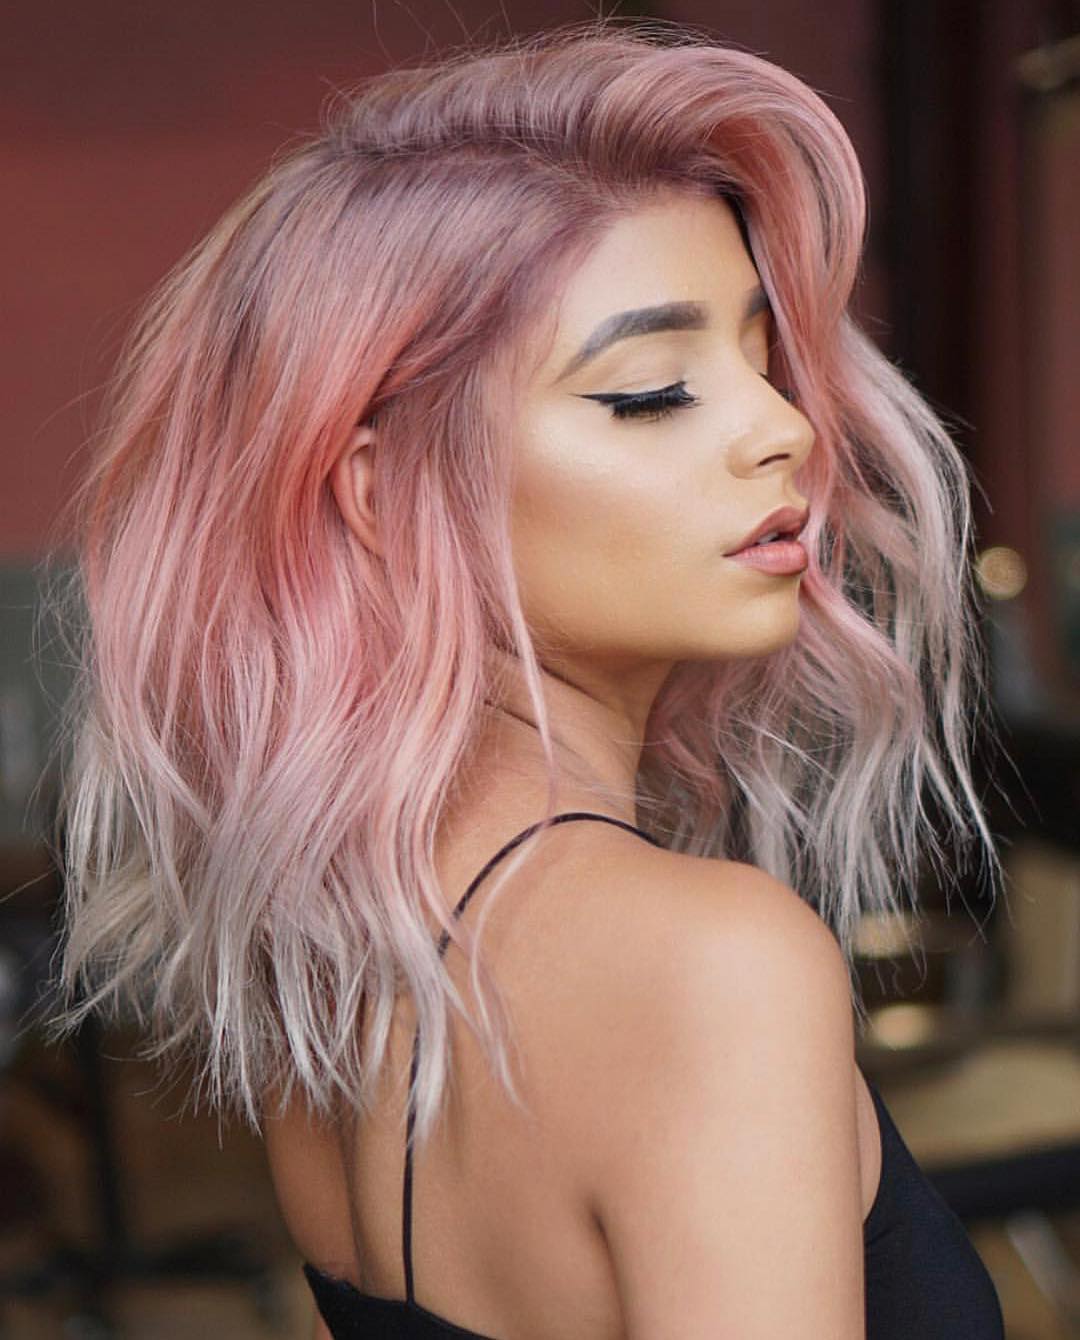 Pink hair is a great way to brighten up your look (+35 photos)